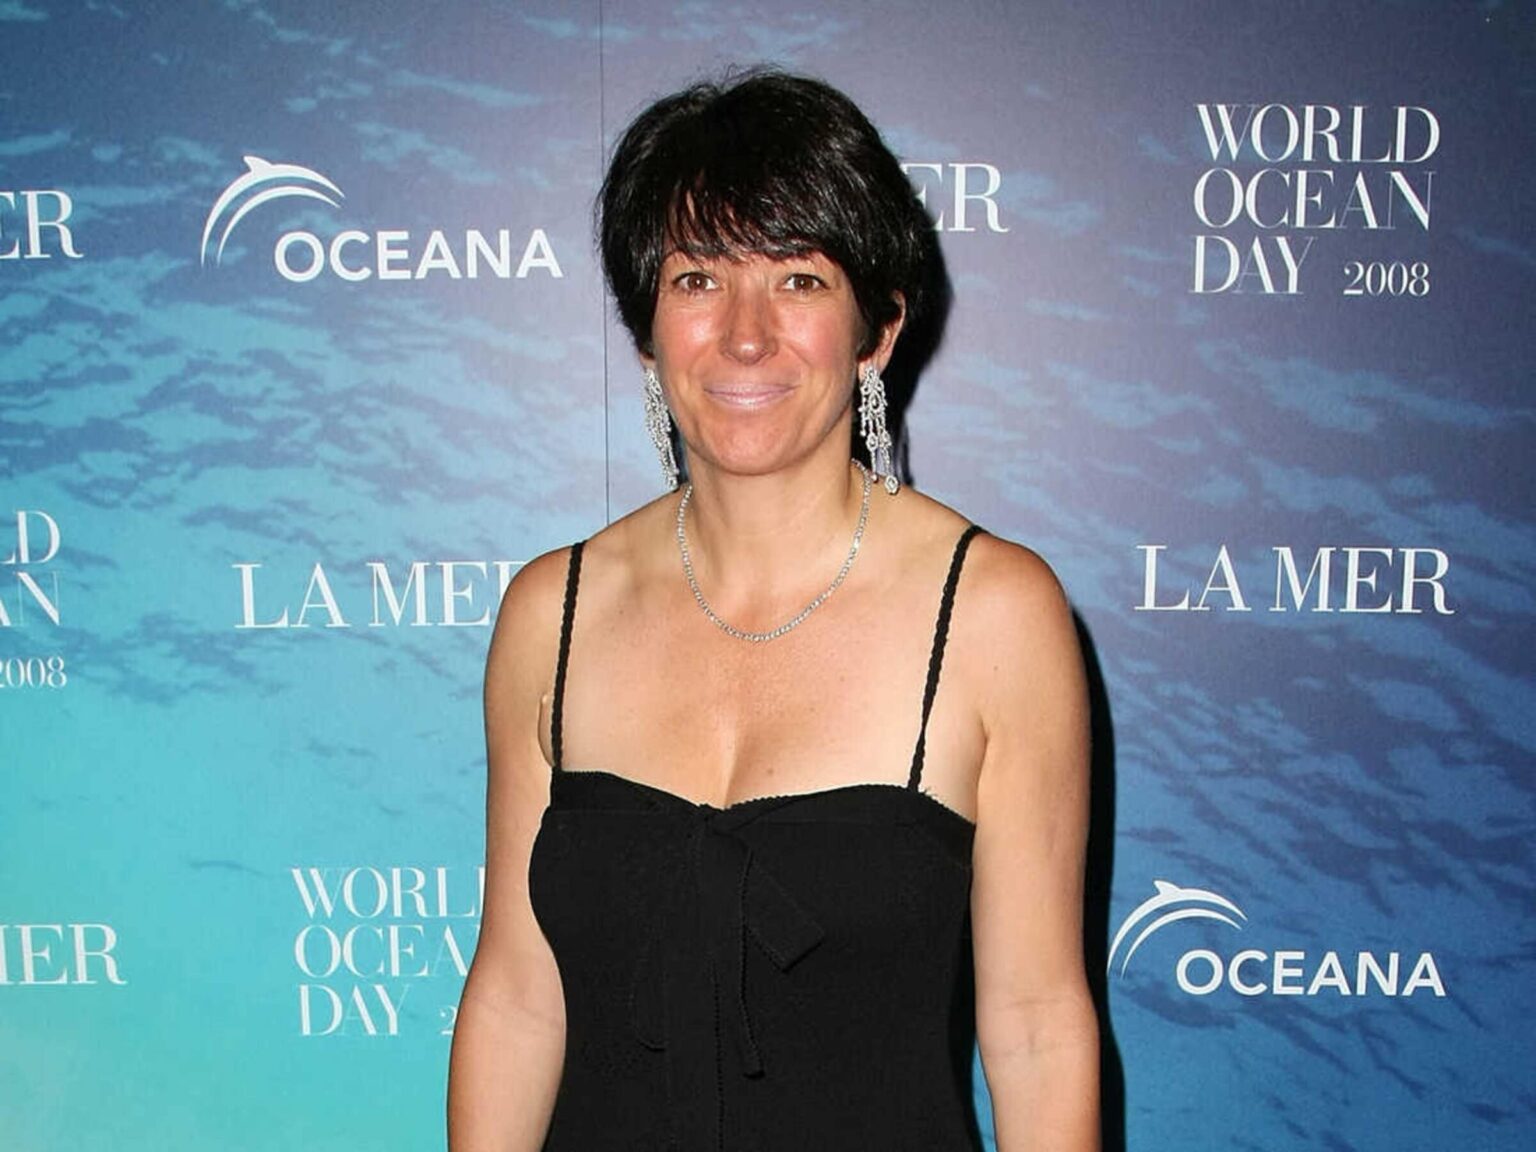 Where's Ghislaine Maxwell now? Is she a “scapegoat” for Jeffrey Epstein’s crimes. Are the accusers “untrustworthy and motivated by money?" Join us!